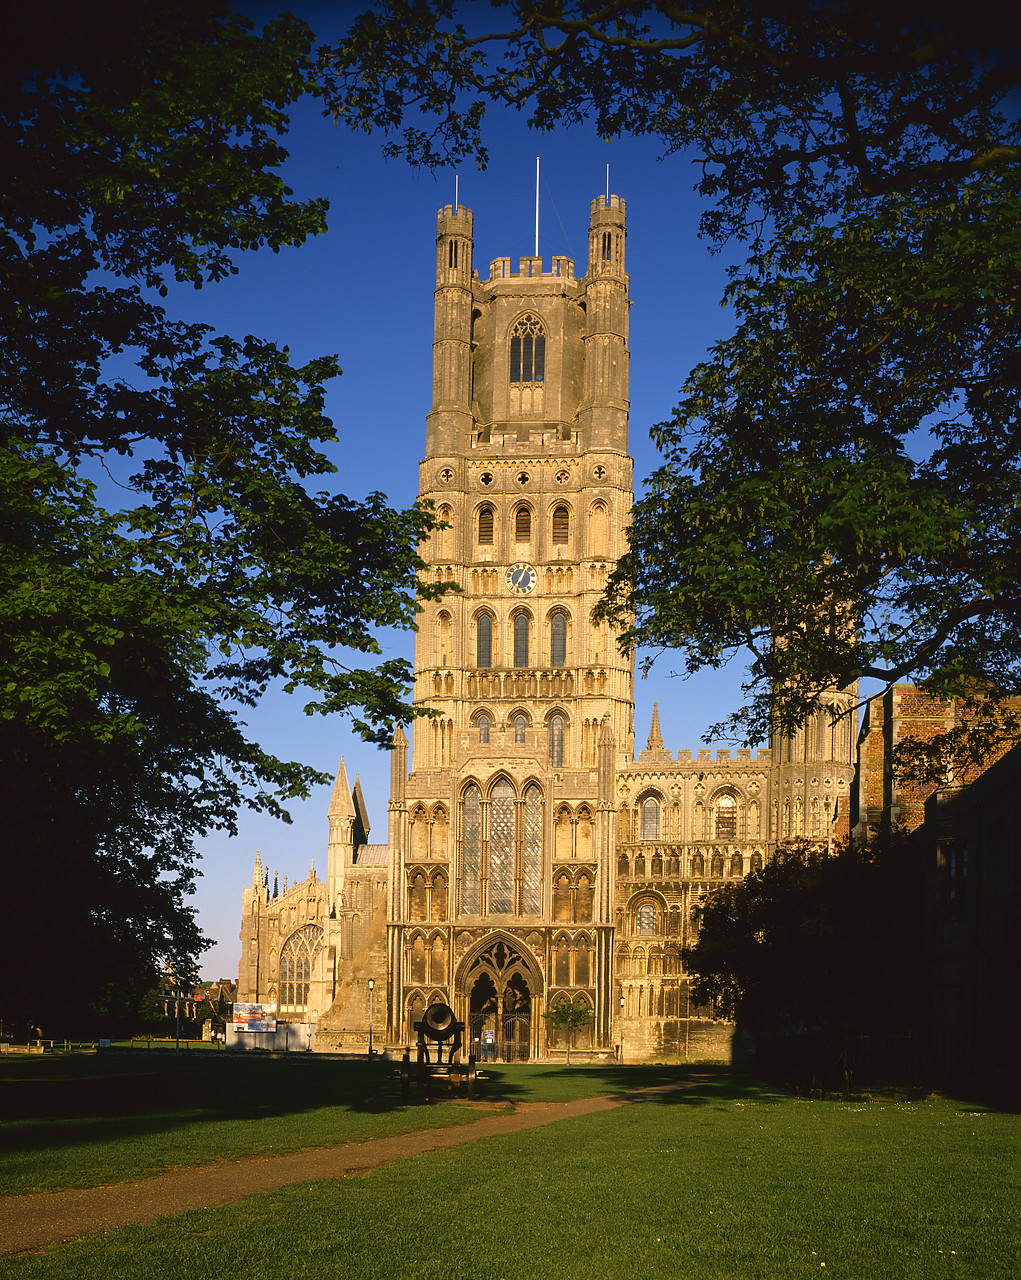 #902854-2 - Ely Cathedral, Ely,  Cambridgeshire, England